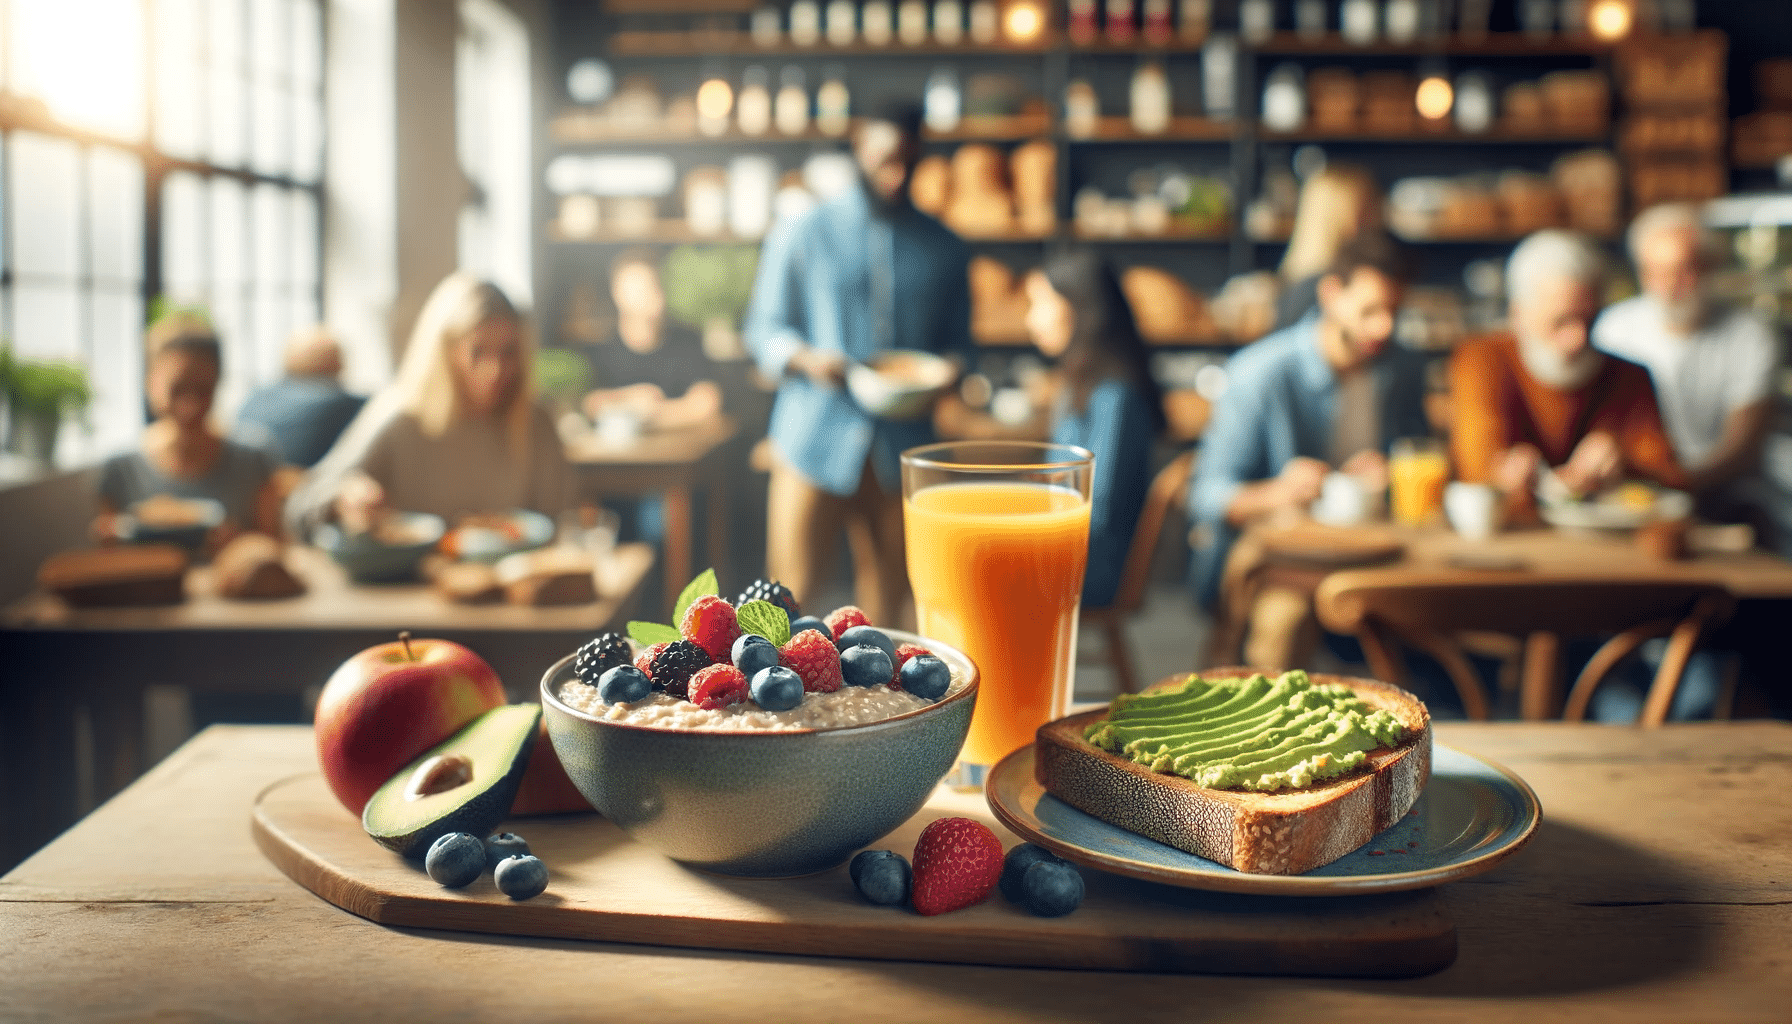 A healthy breakfast scene with a close up focus on the food items and people in the background in a gourmet bakery setting. The breakfast includes a